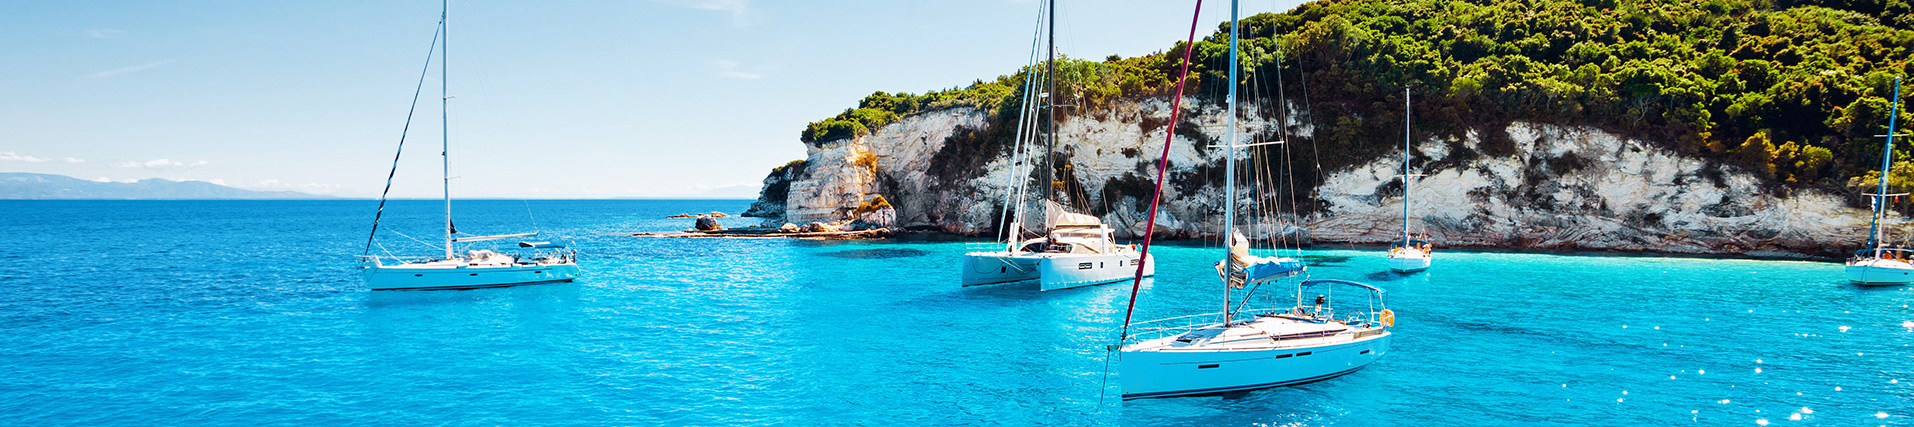 Sailboats charter in Spain